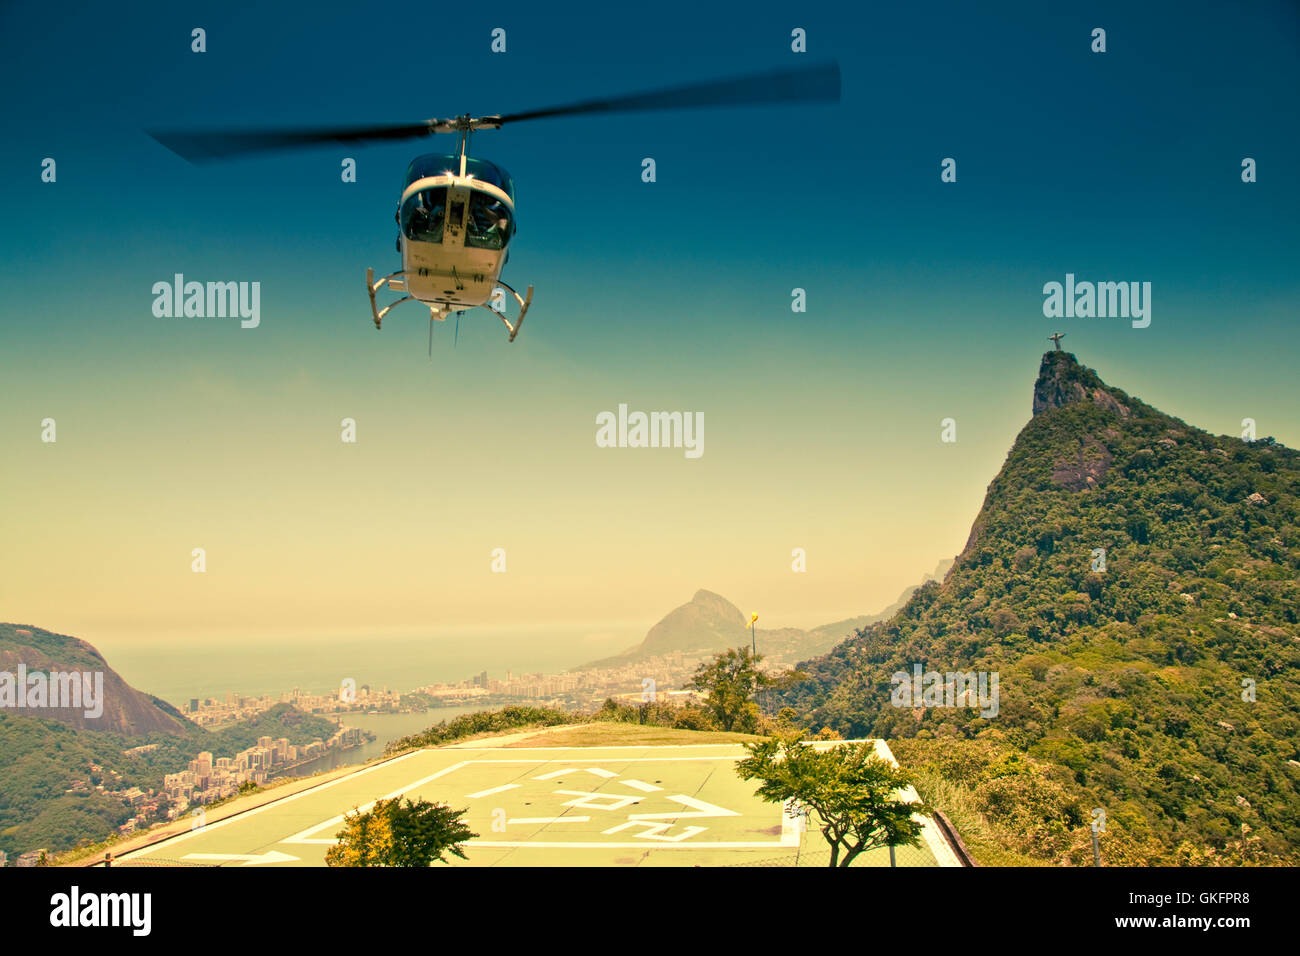 Helicopter in air in front of Corcovado Rio De Janeiro Brazil Stock Photo